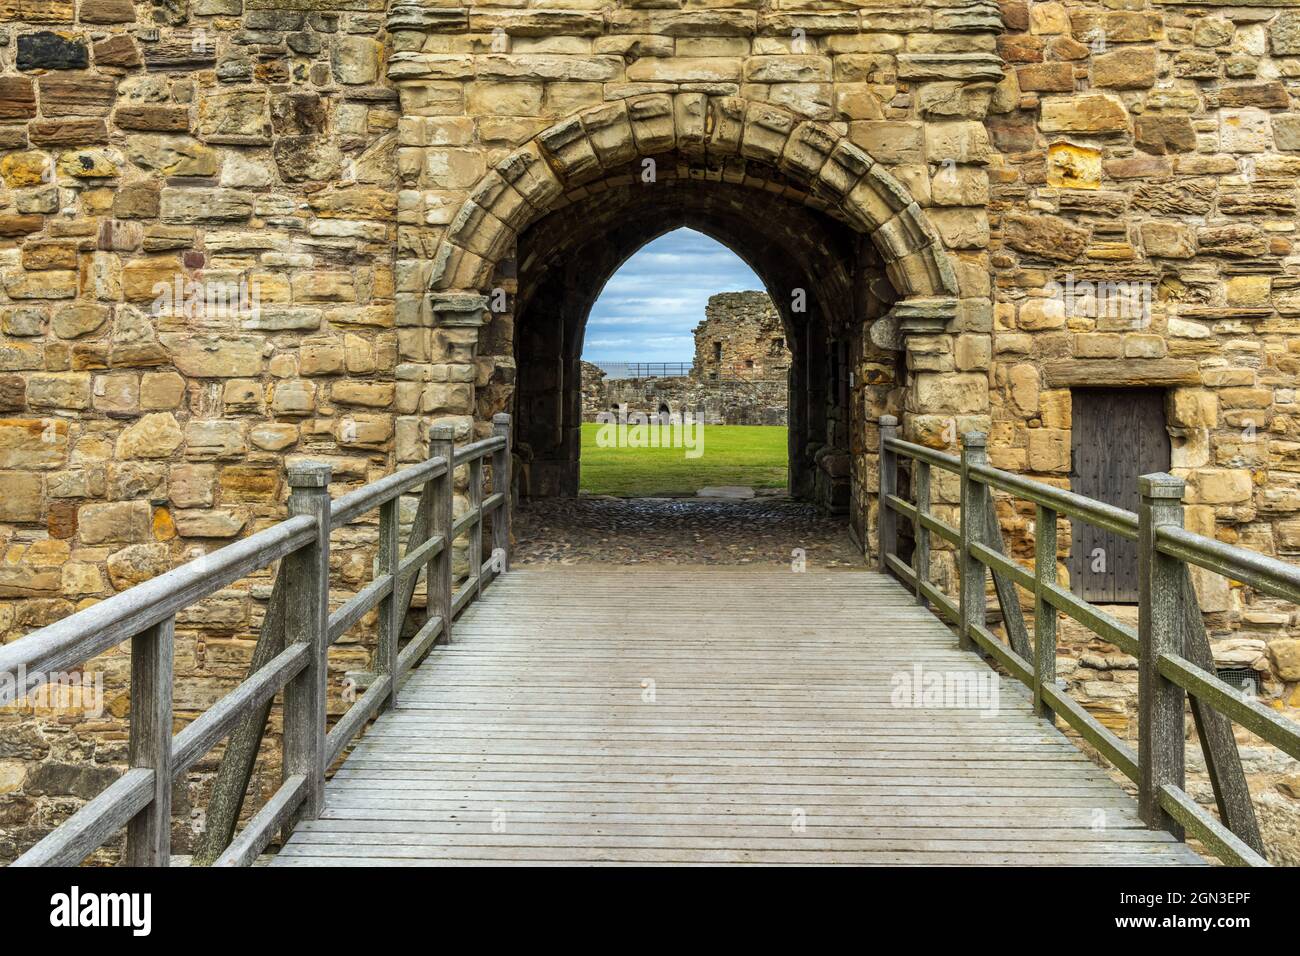 Entrance to St. Andrews Castle ruins dating from 13th century, a popular tourist attraction in this famous university town, St. Andrews, Scotland. Stock Photo